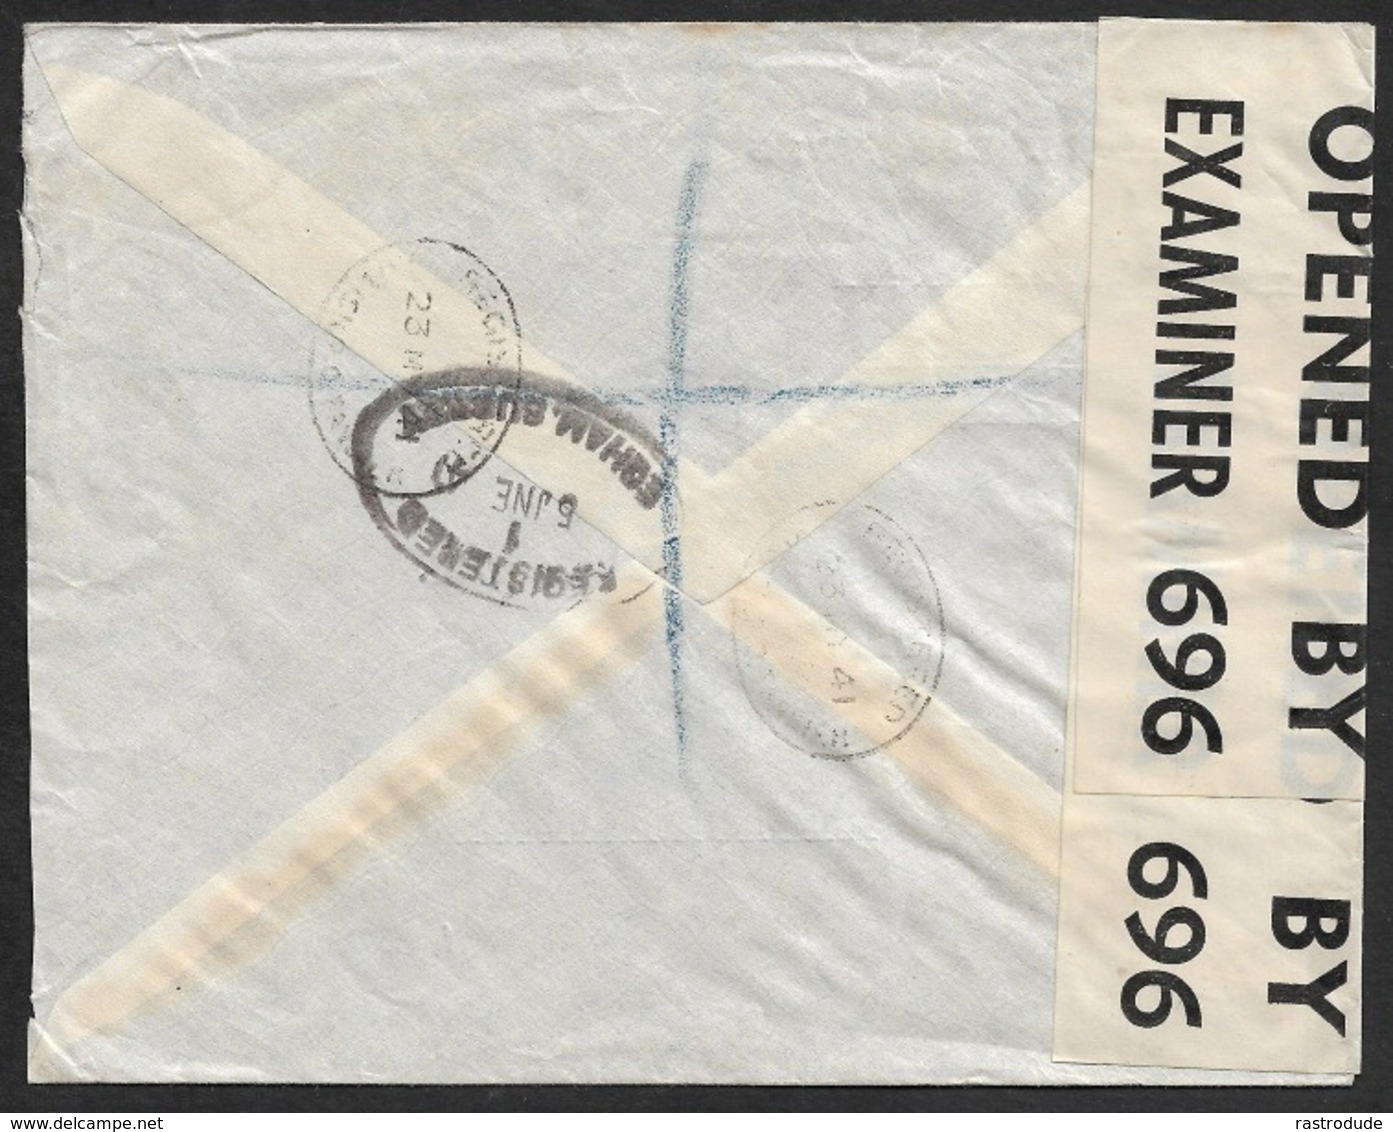 1940 - B.P.O TANGIER / GB Mixed Franking - Censored Registered Airmail To GB - Scarce - Morocco Agencies / Tangier (...-1958)